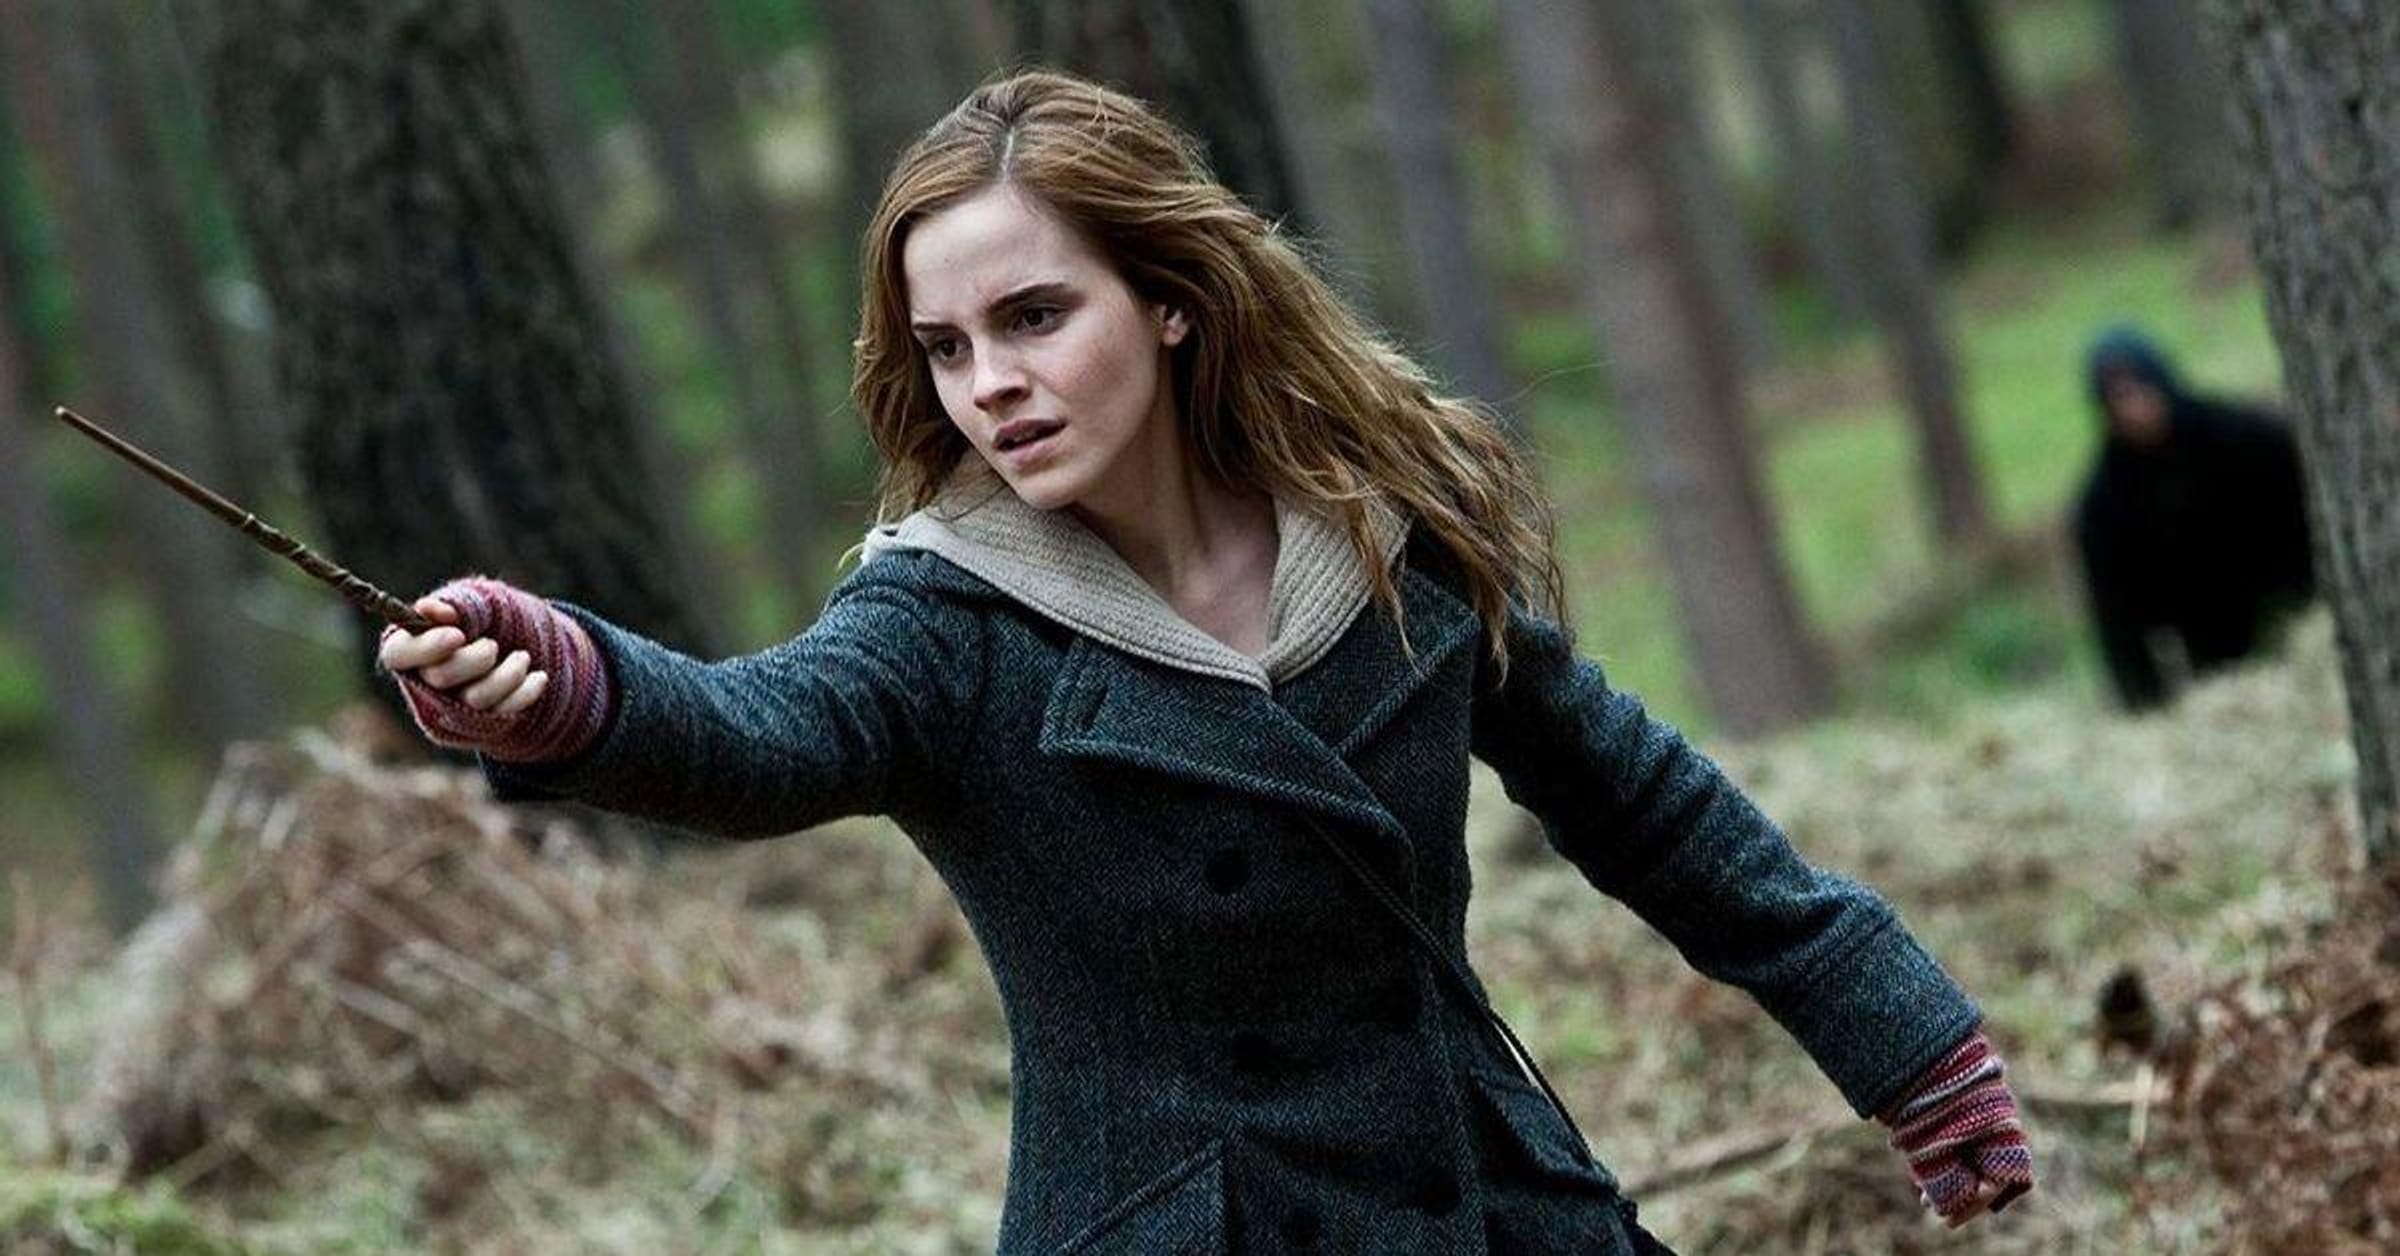 Emma Watson Revealed the Hardest Thing About Playing Hermione